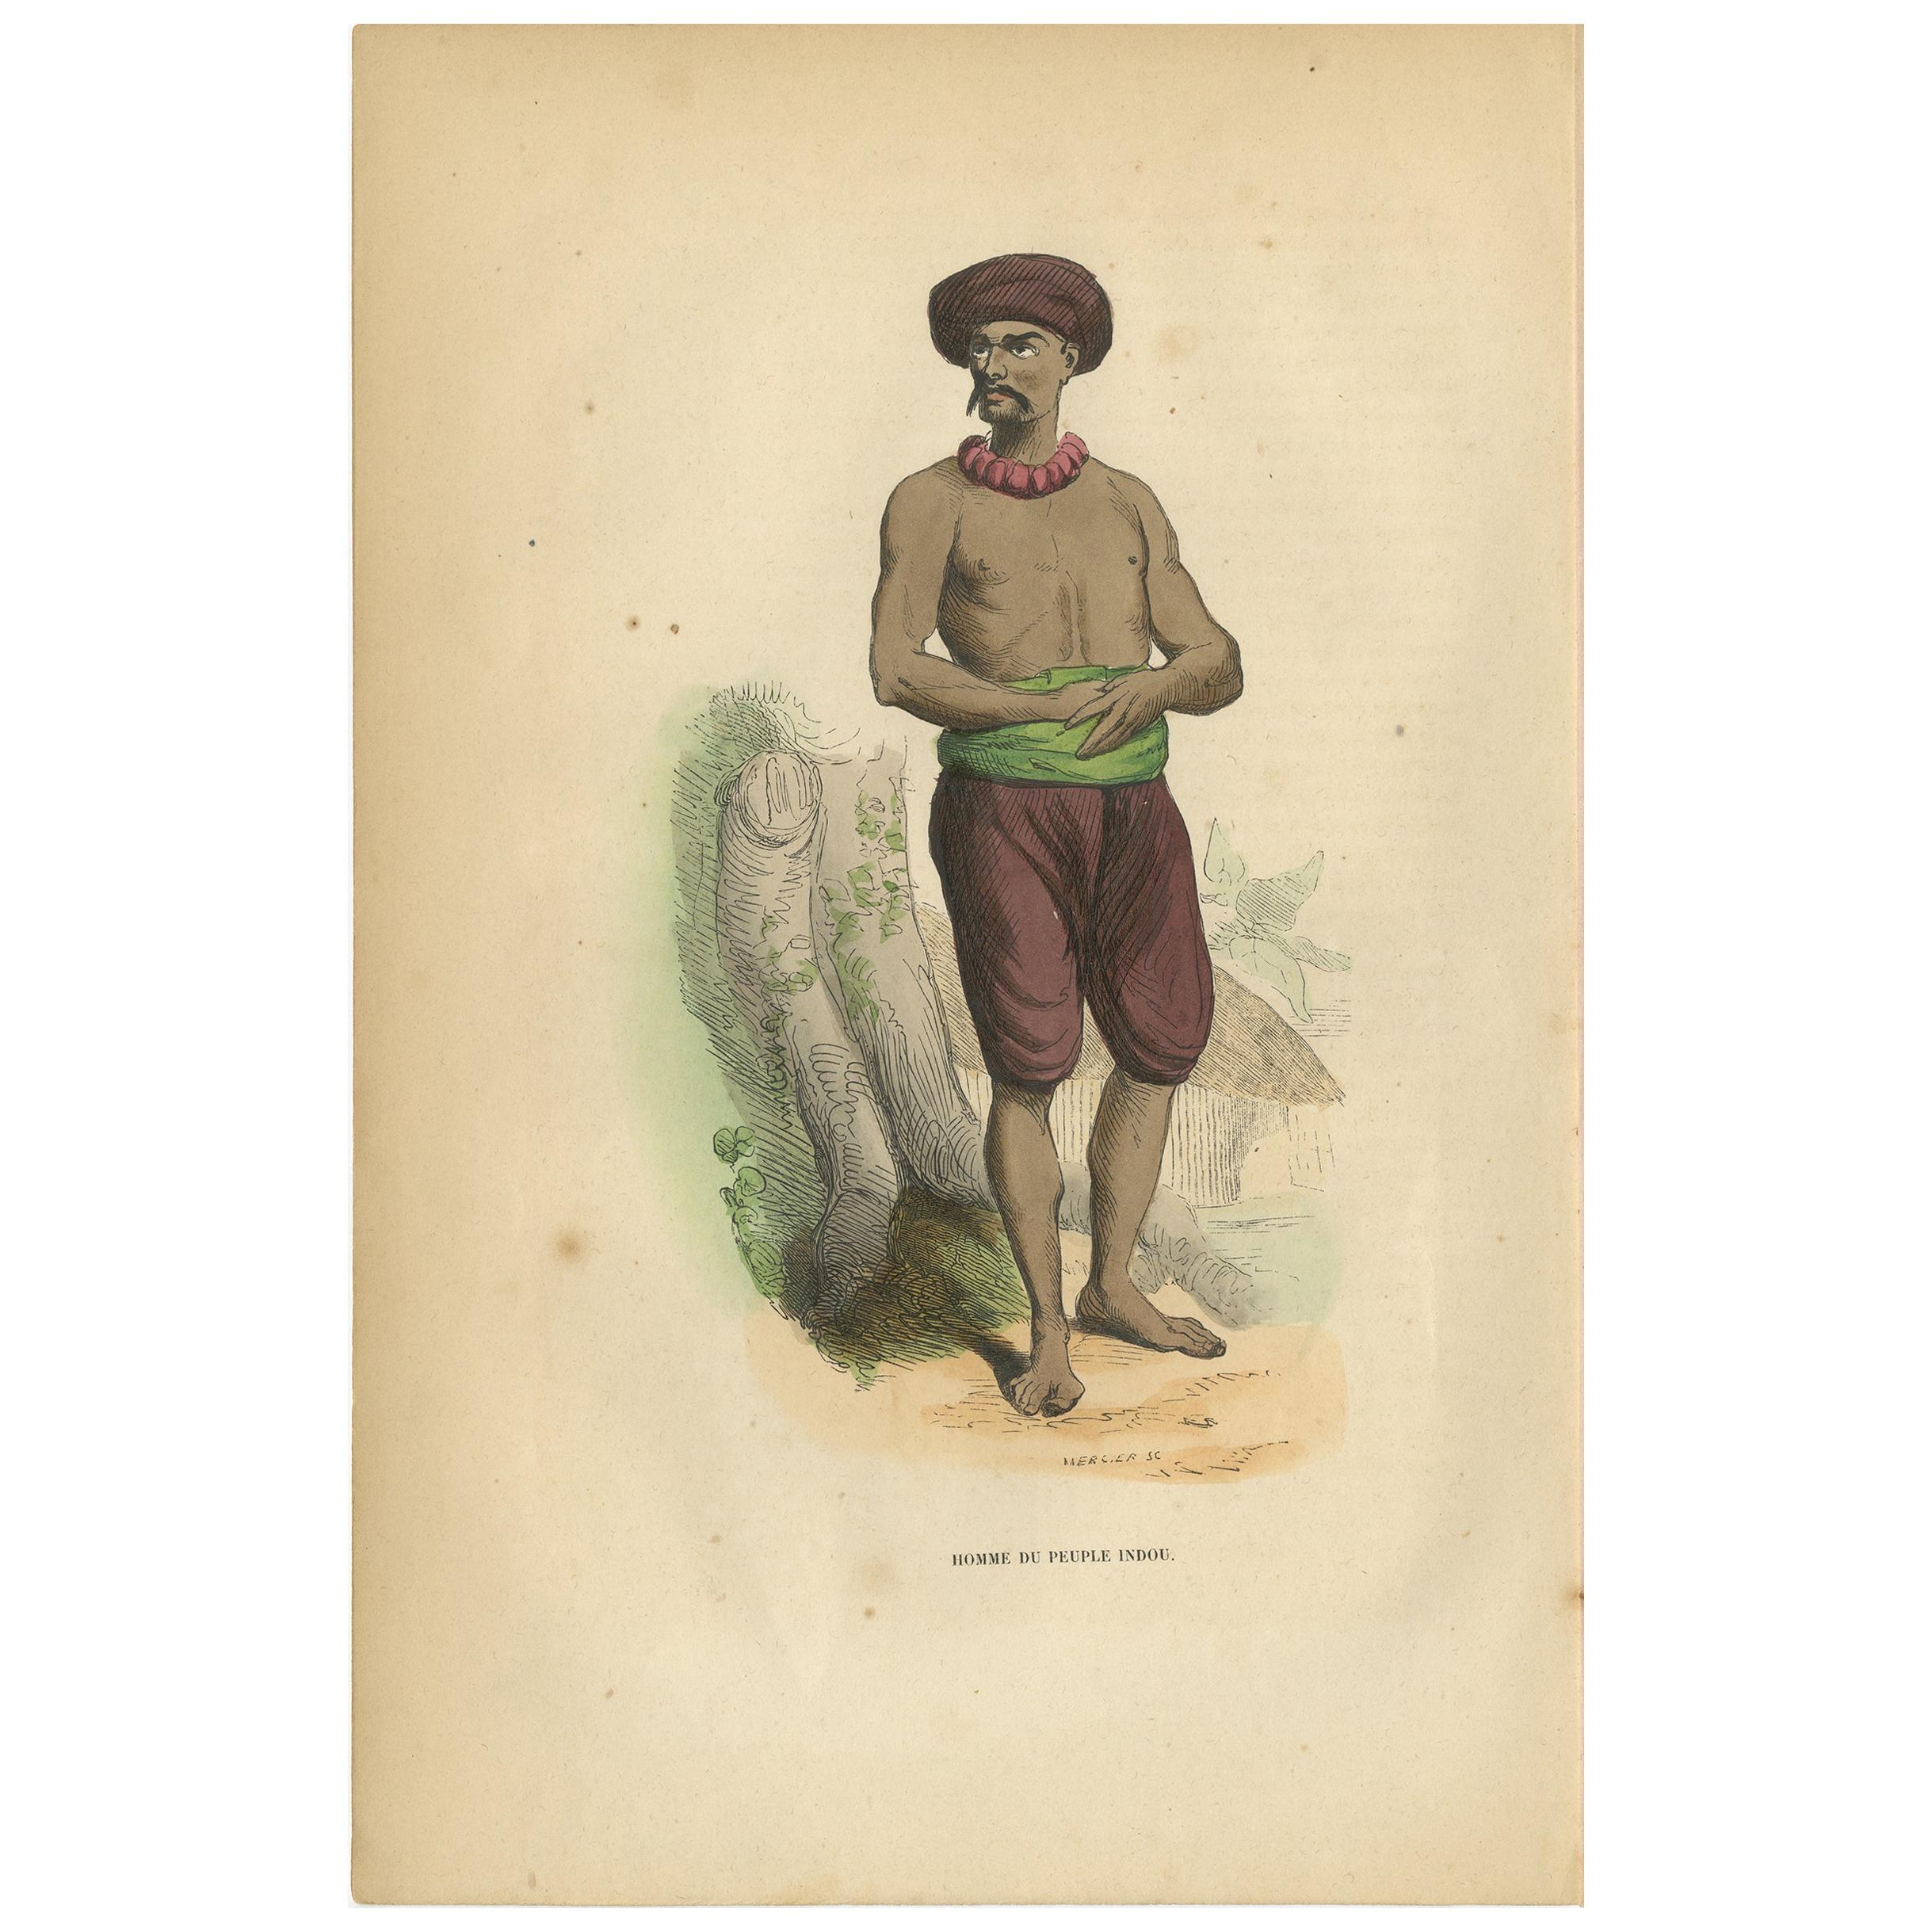 Antique Print of a Man of the Hindu People by Wahlen '1843'